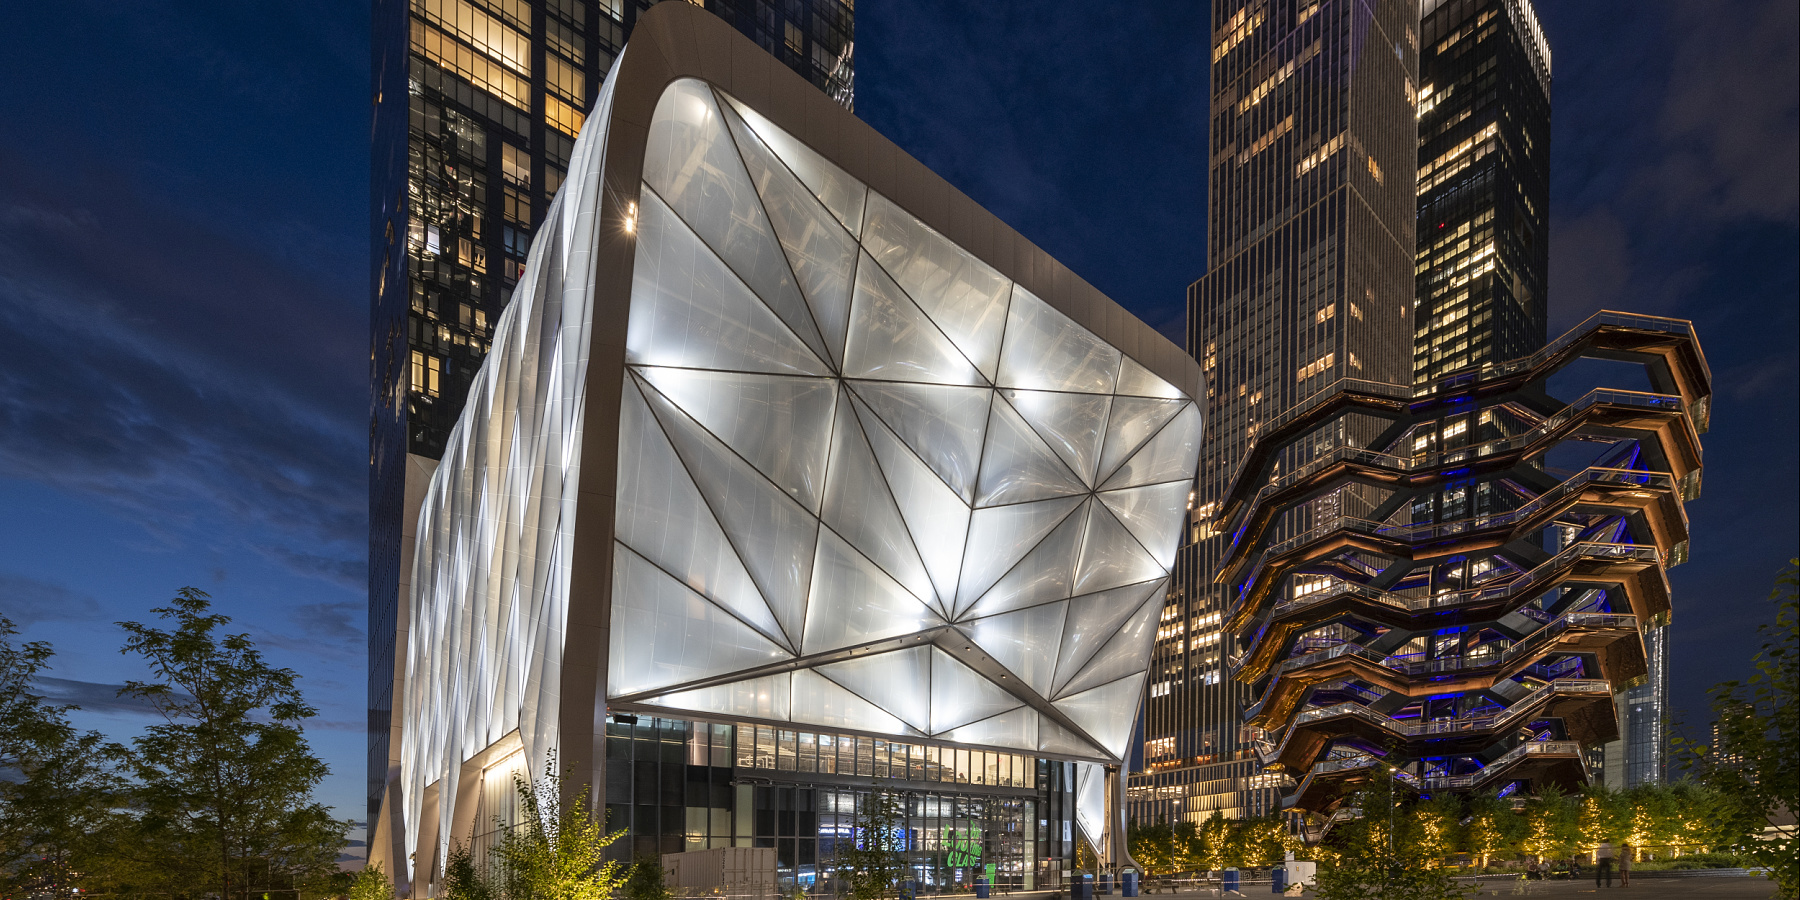 https://www.erco.com/images/the-shed-hudson-yards-new-york-city-erco-7111/usa-7111-rep.jpg